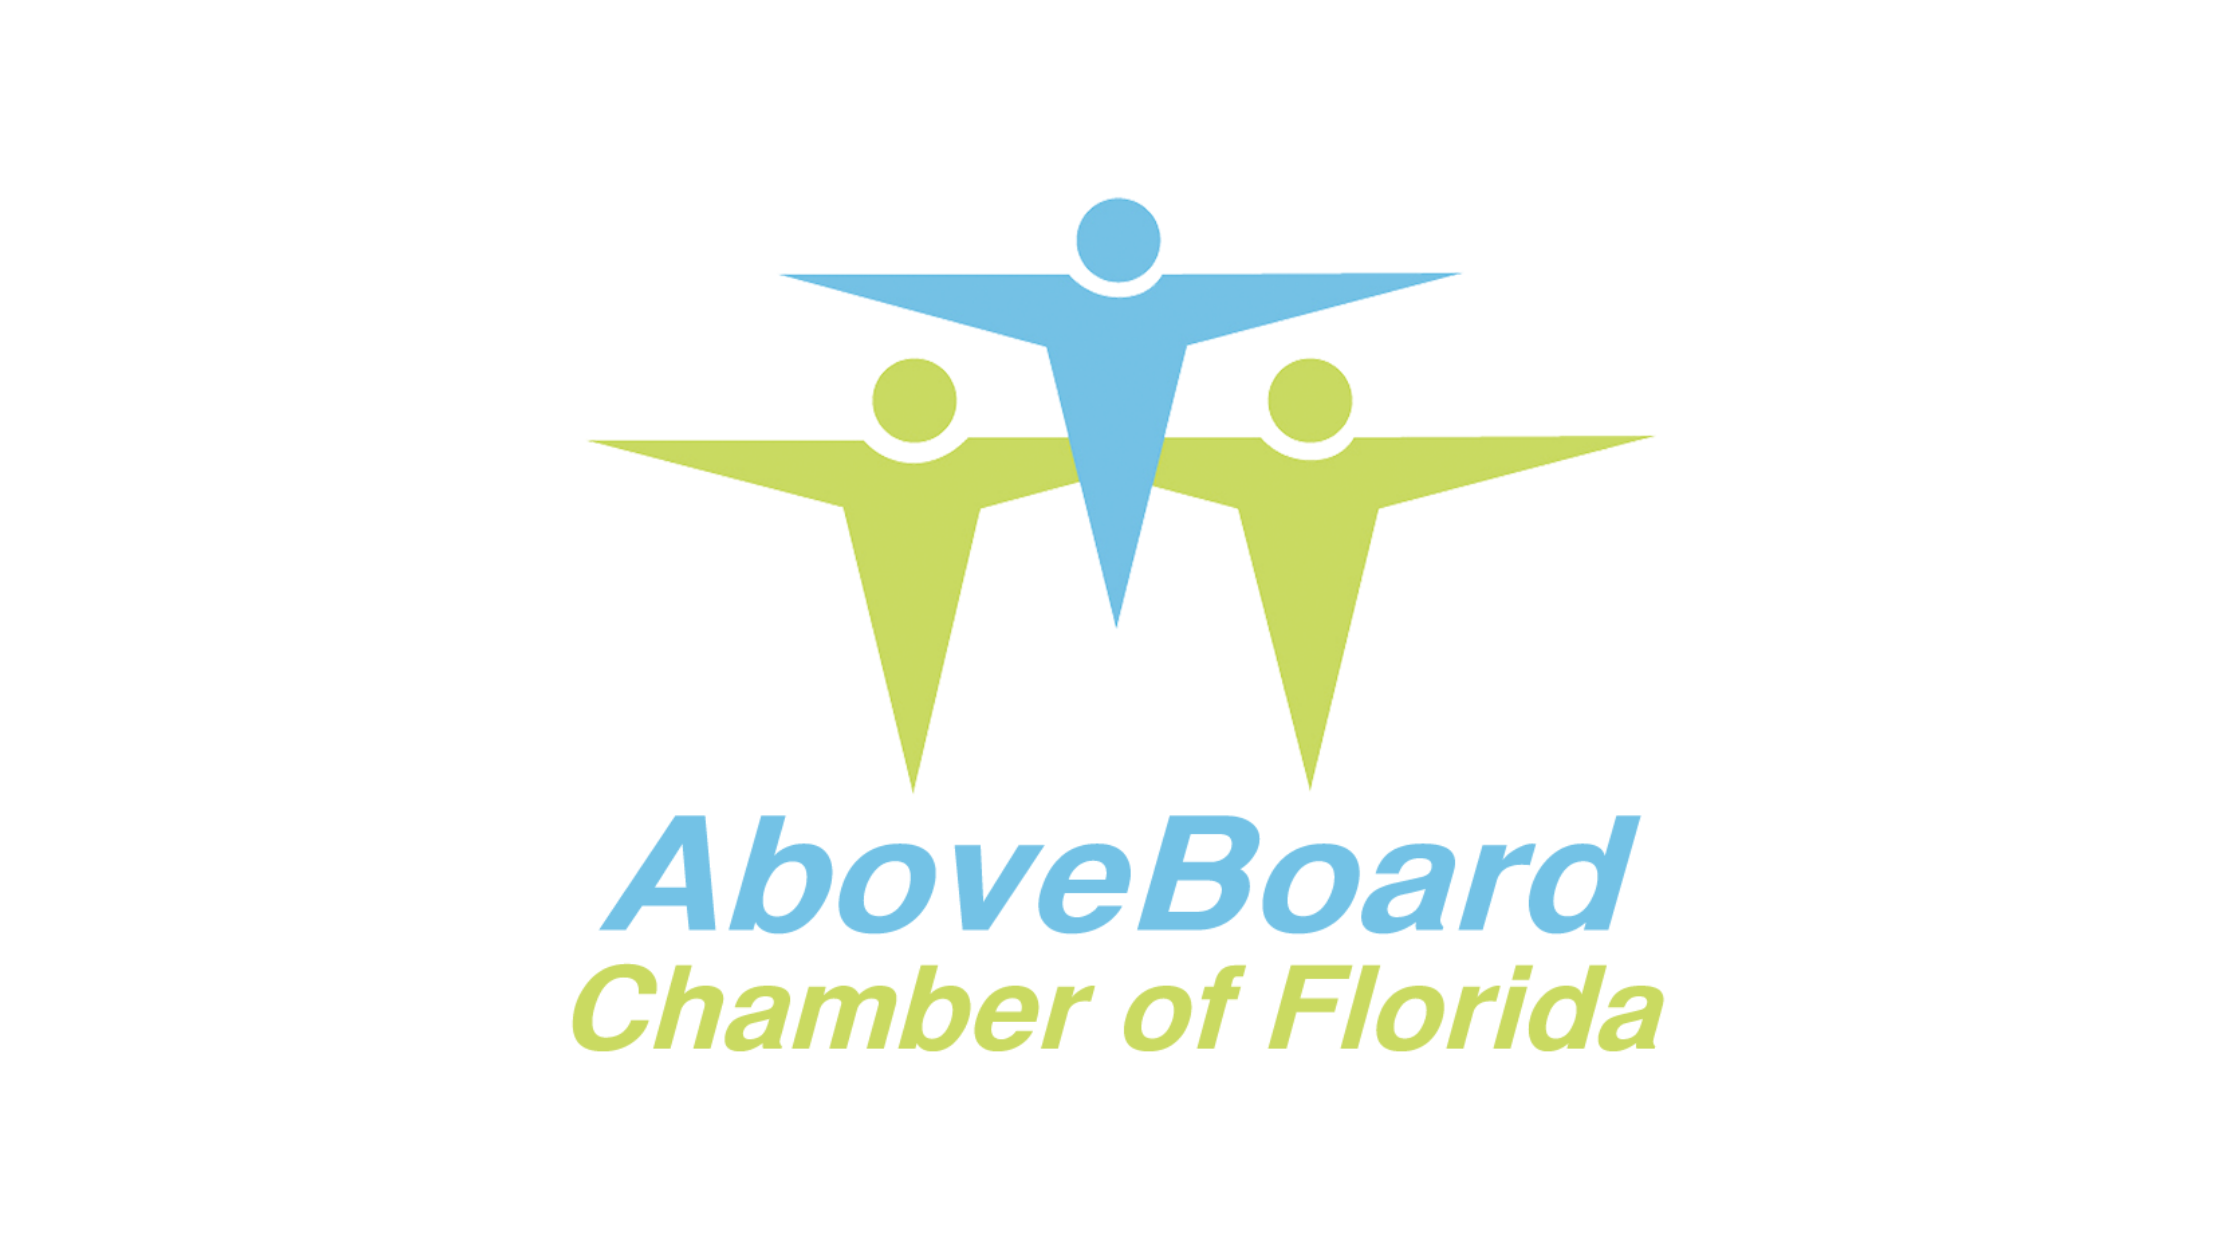 Above Board Chamber to share technology tips that will help companies become more productive